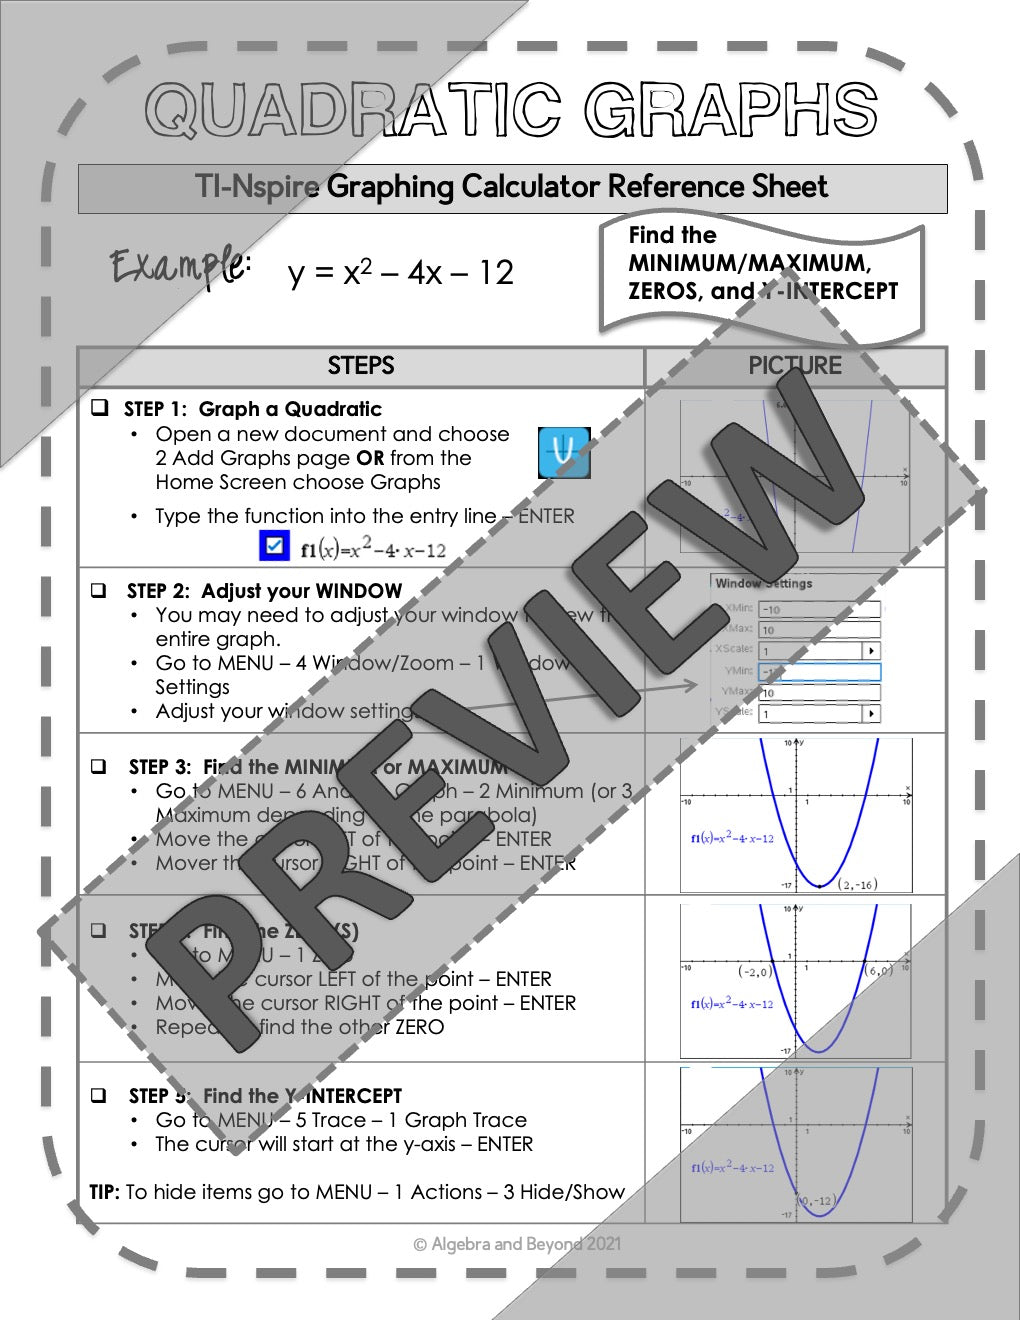 Quadratic Graphs | TI-Nspire Graphing Calculator Reference Sheets